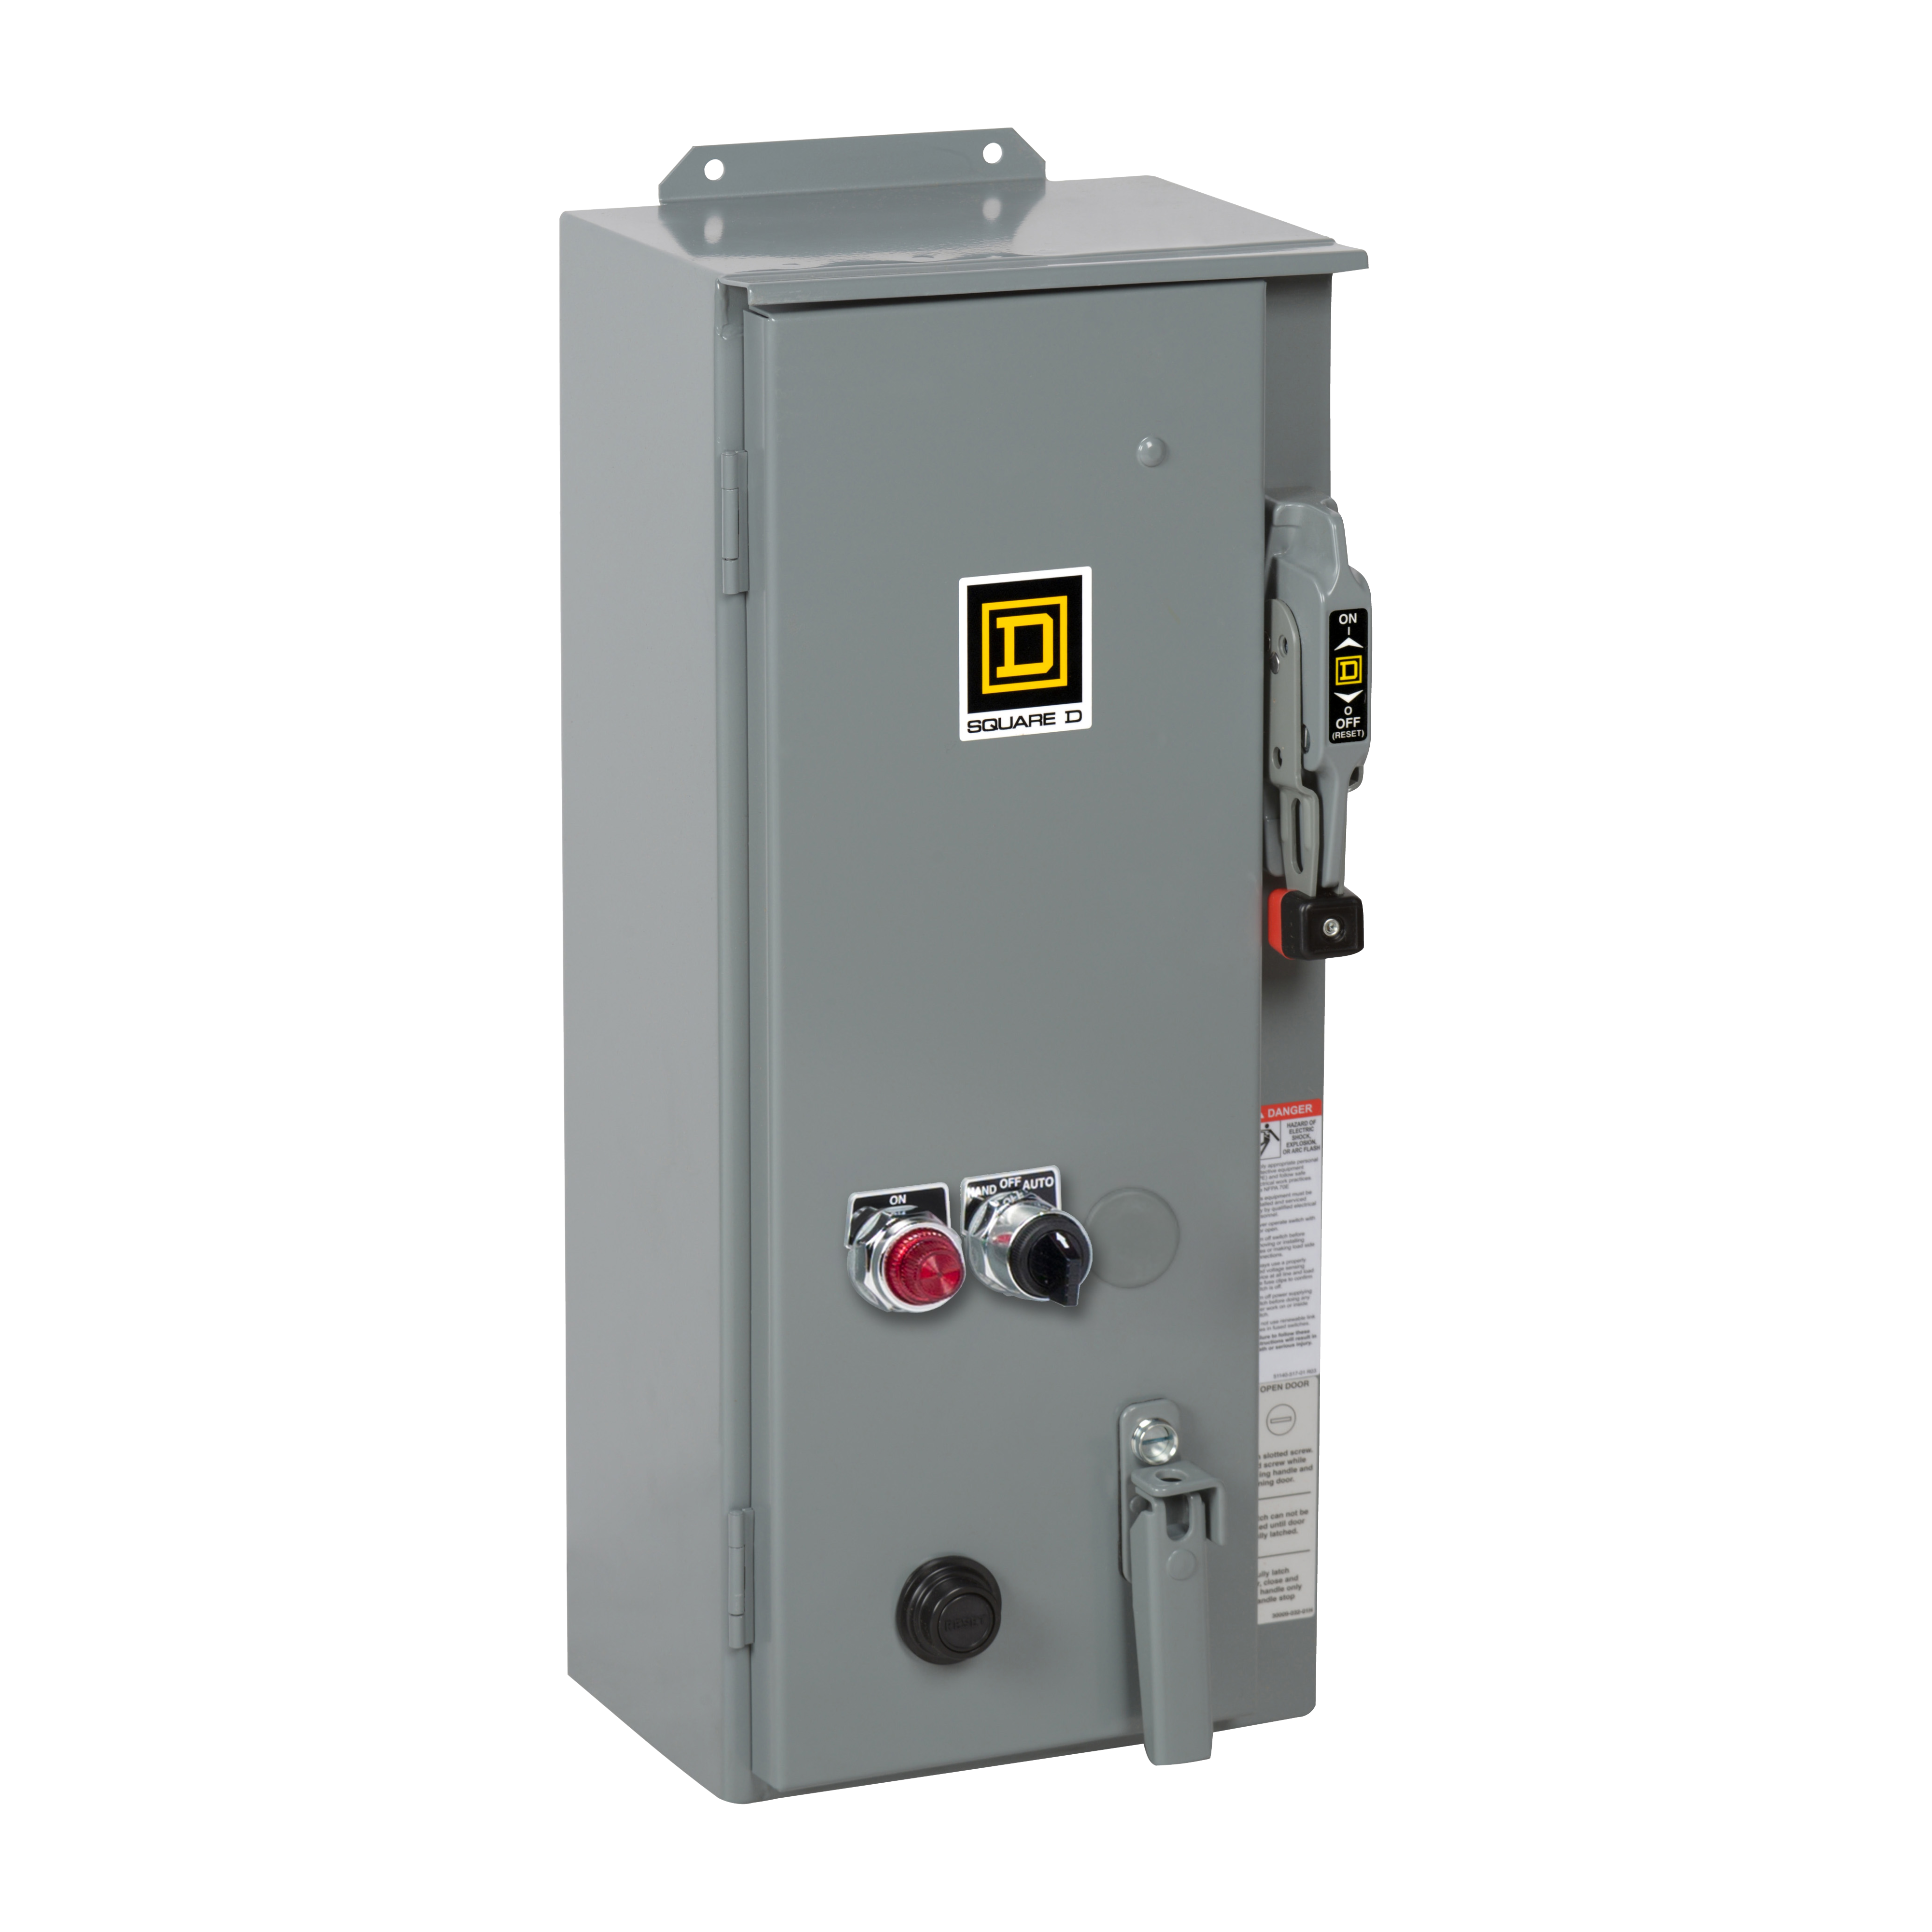 NEMA Combination Starter, Type S, 30A fusible disconnect, Size 1, 27A, 10 HP at 600 VAC polyphase, 120 VAC coil, NEMA 12